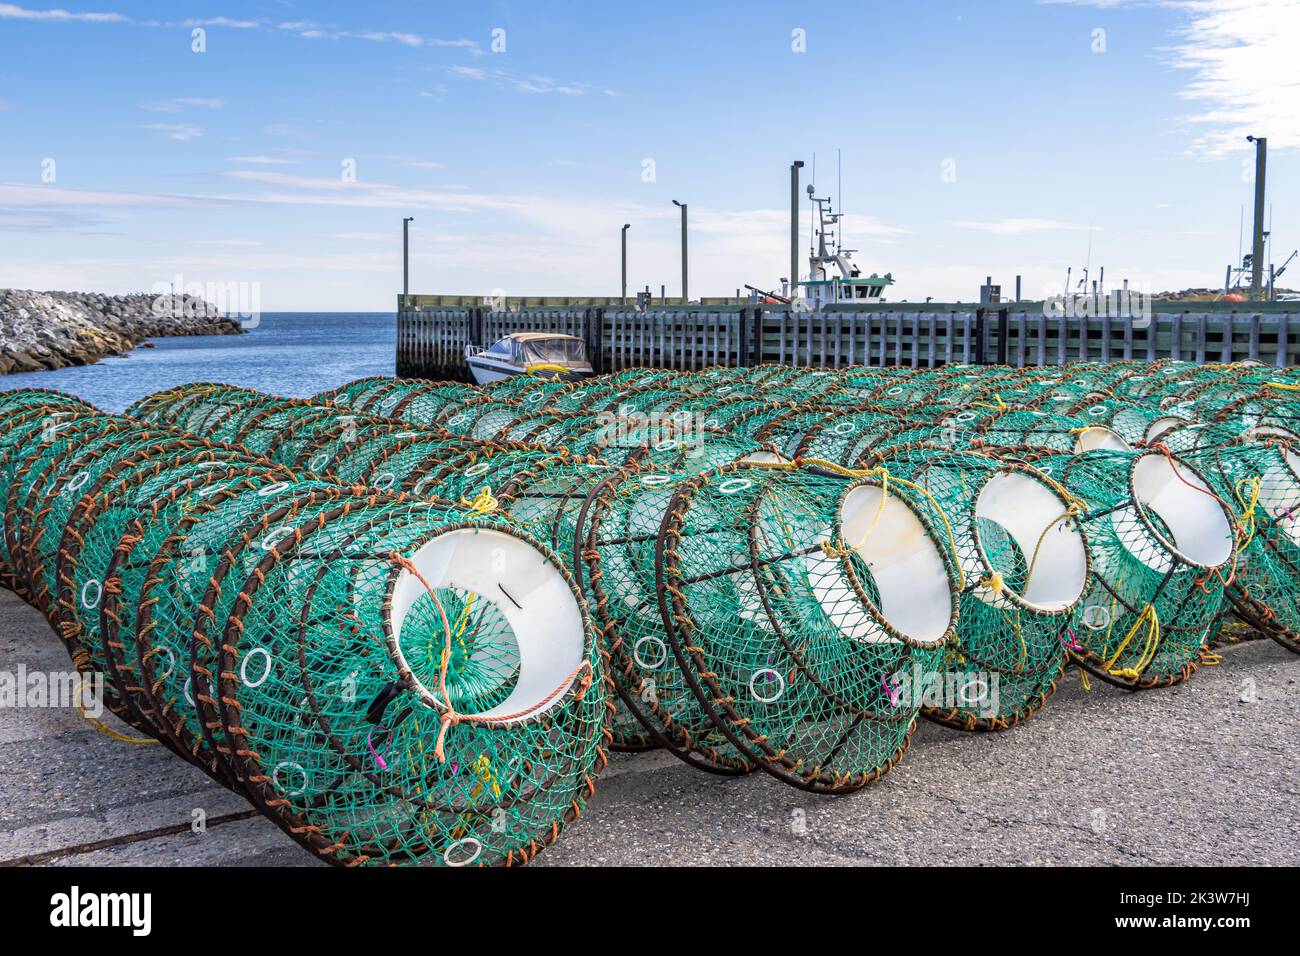 Fishing traps stacked on the pier. Ste-Anne-des-Monts, Gaspesia, Quebec, Canada. Commercial fishing dock. Stock Photo